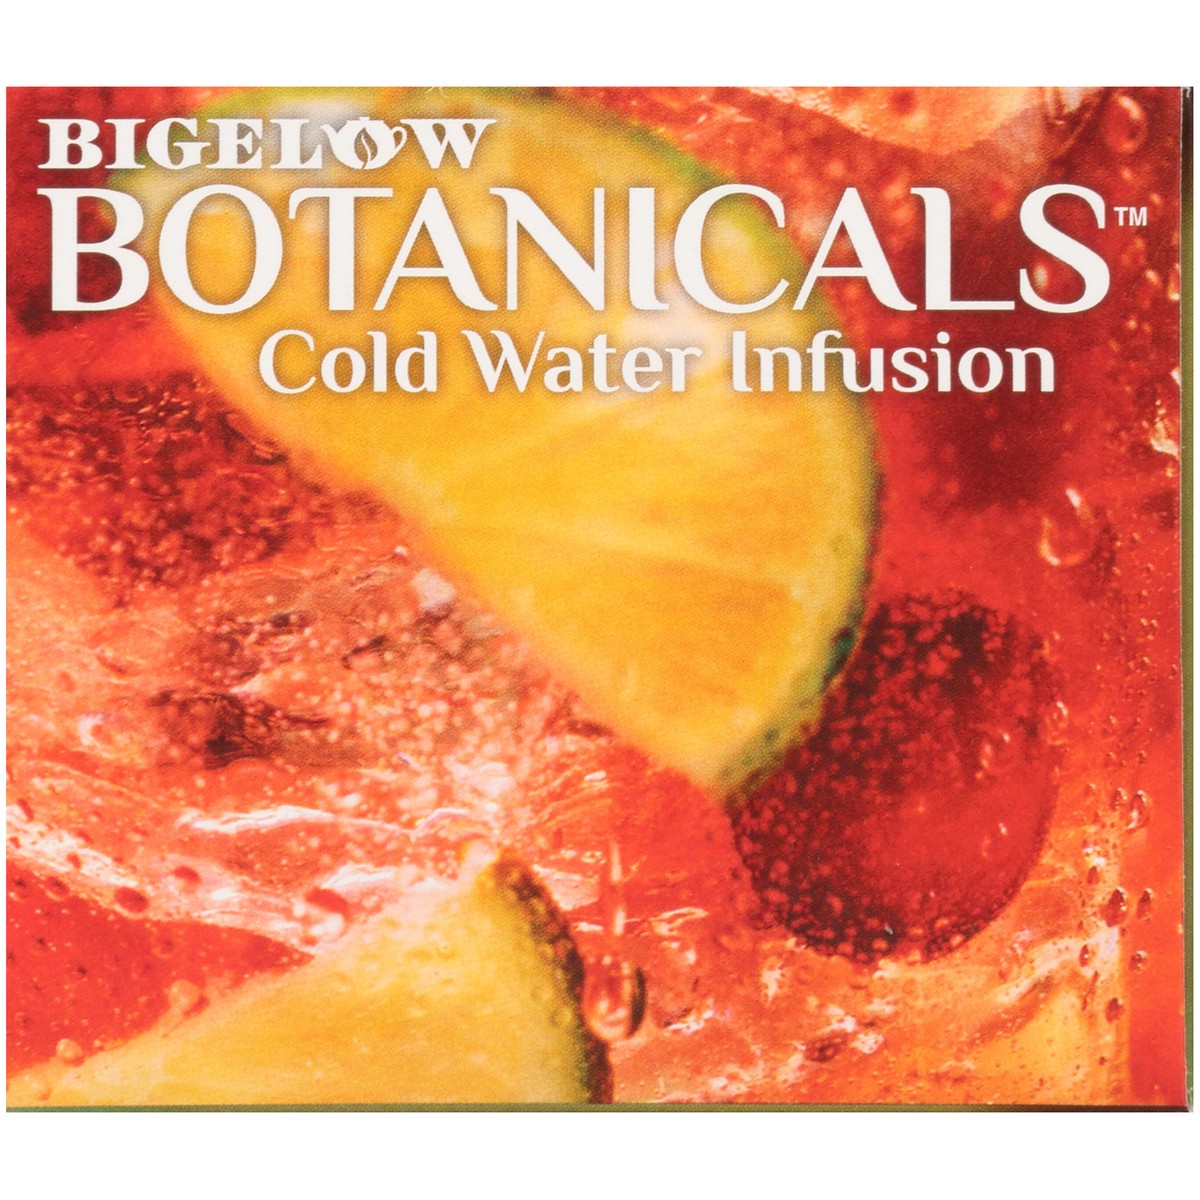 slide 8 of 9, Bigelow Botanicals Cold Water Infusion Tea Bags, Cranberry Lime Honeysuckle - 18 ct, 18 ct